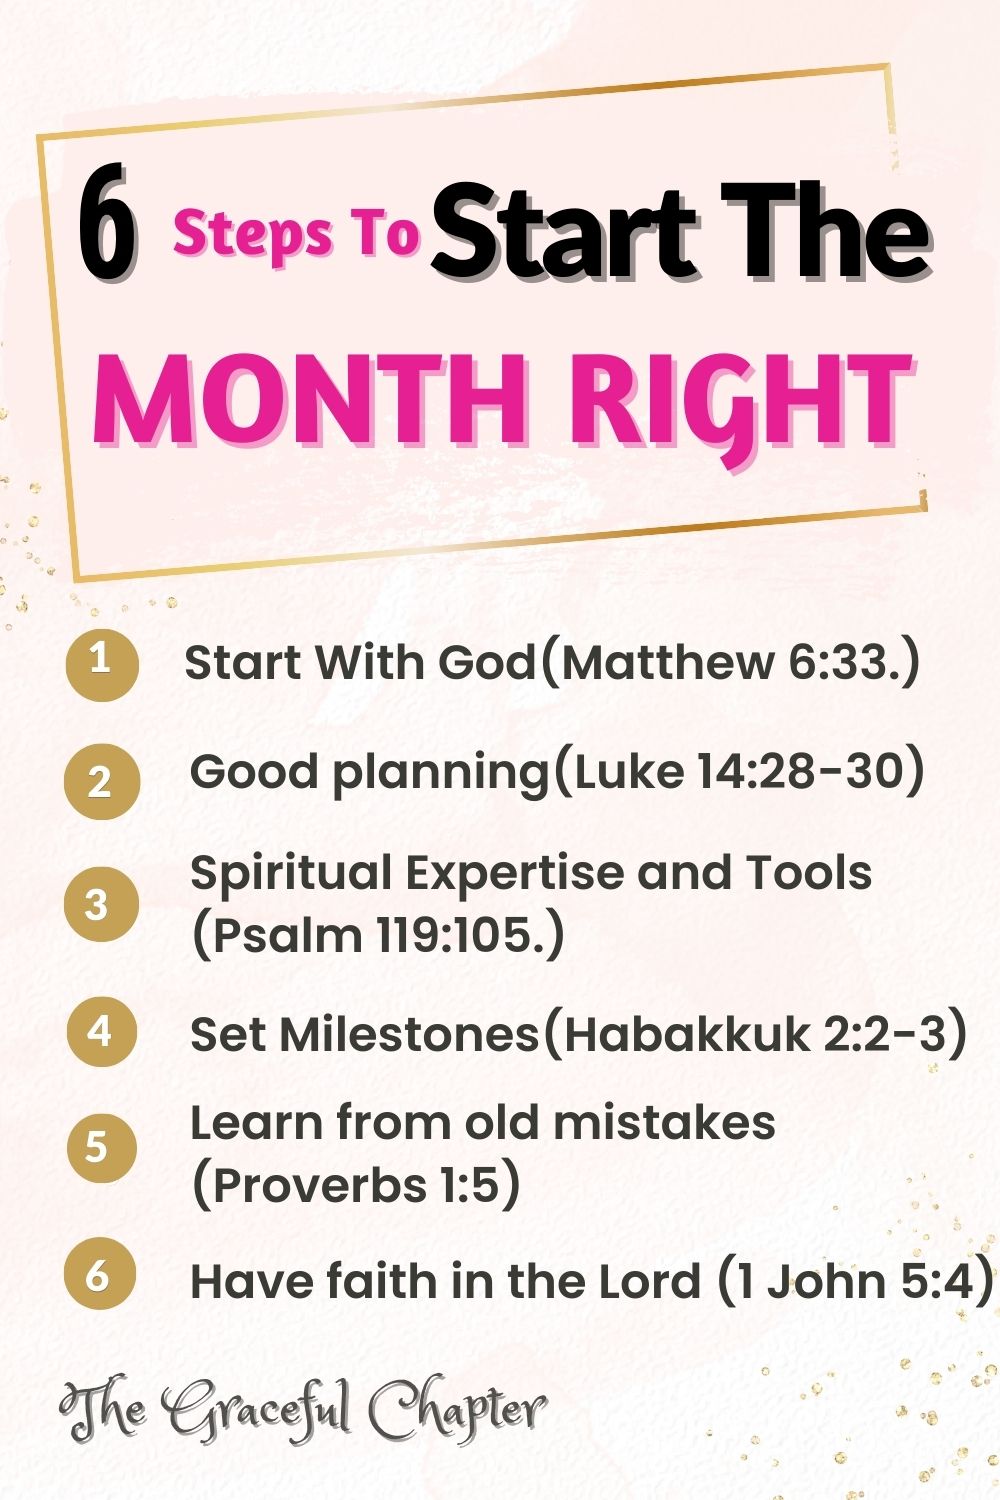 6 steps to start the month right